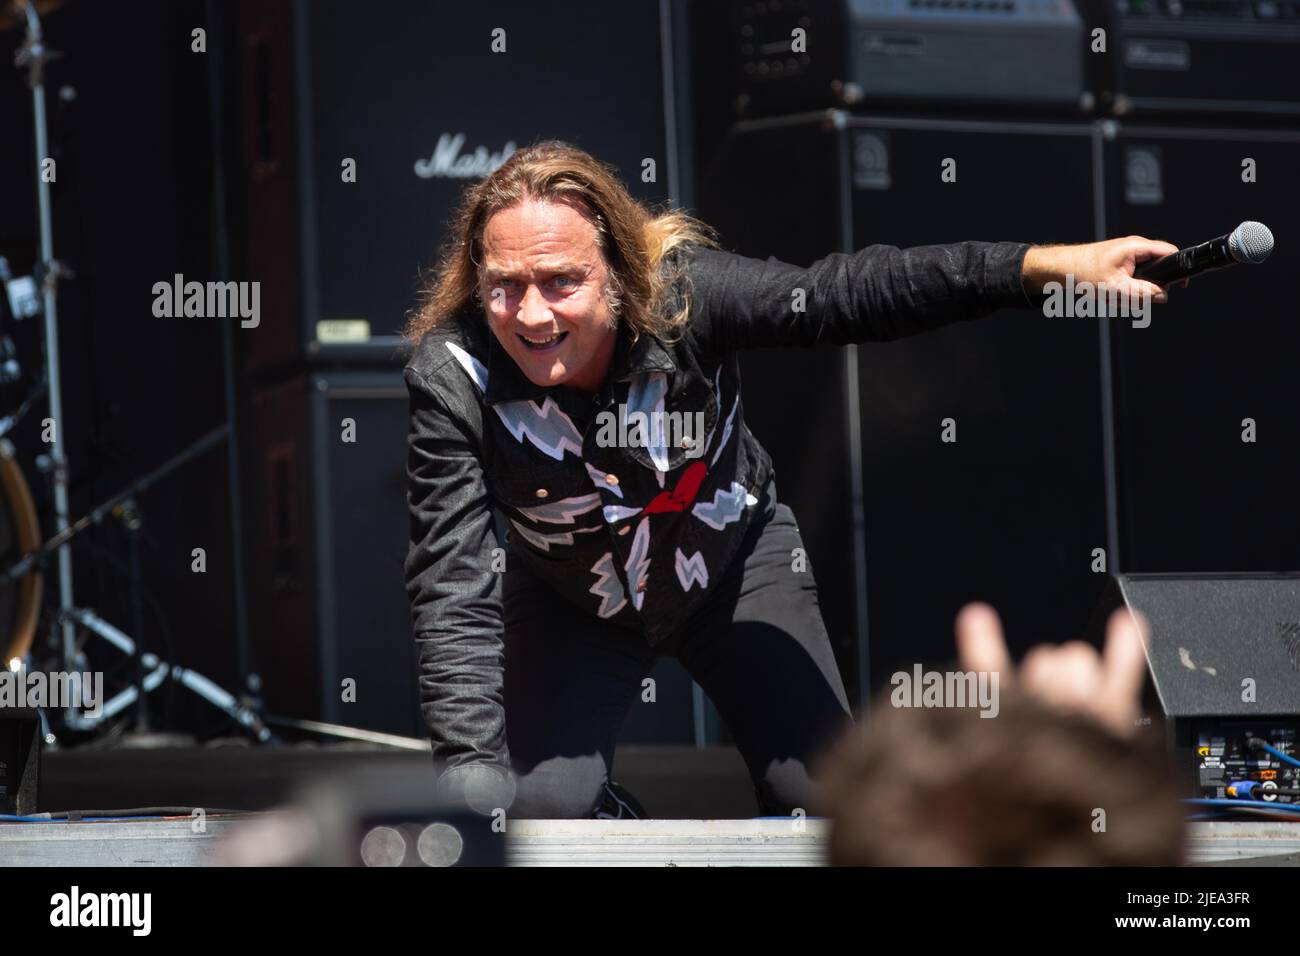 Oslo, Norway. 24th, June 2022. The Danish rock band D-A-D performs a live concert during the Norwegian music festival Tons of Rock 2022 in Oslo. Here vocalist and guitarist Jesper Binzer is seen live on stage. (Photo credit: Gonzales Photo - Per-Otto Oppi). Stock Photo